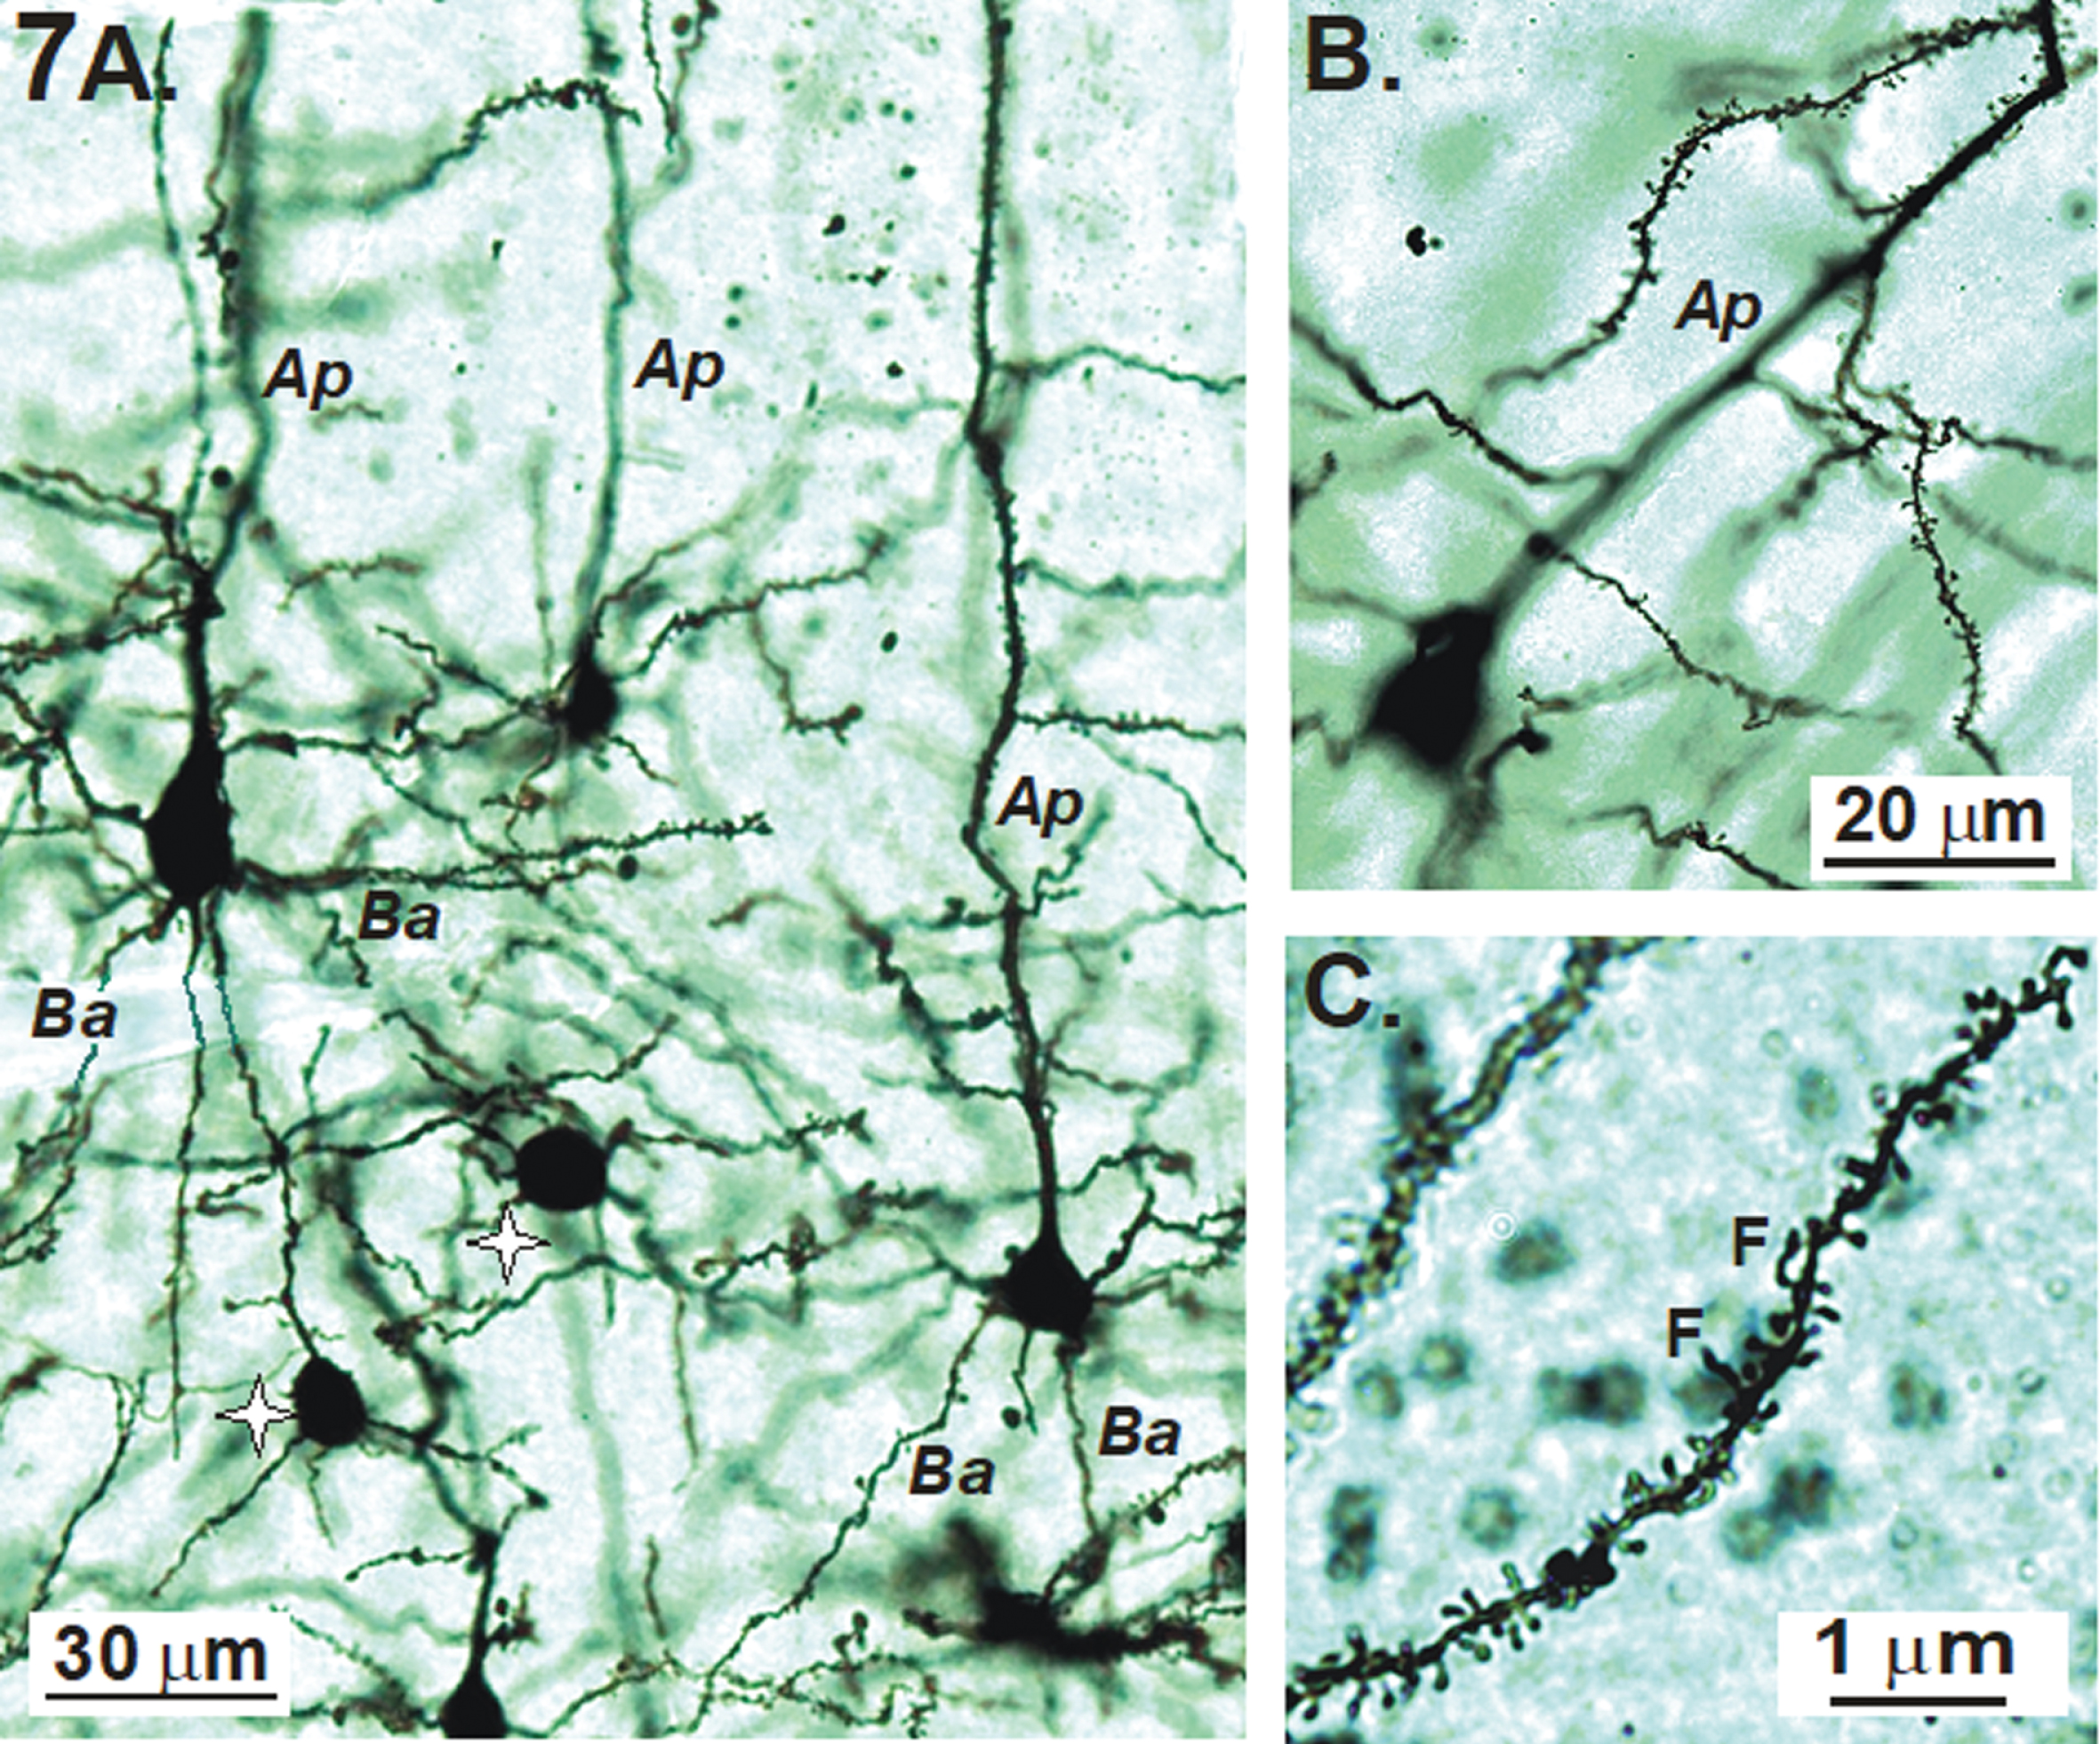 A, B) Examples of Golgi-Cox stained pyramidal neurons of the primary sensory cortex with their apical (Ap) and basal (Ba) dendrites. Non-spiny interneurons (stars) also stain. C) In this image, most of the dendritic spines are mushroom-shaped with a few filapodic (F) spines.